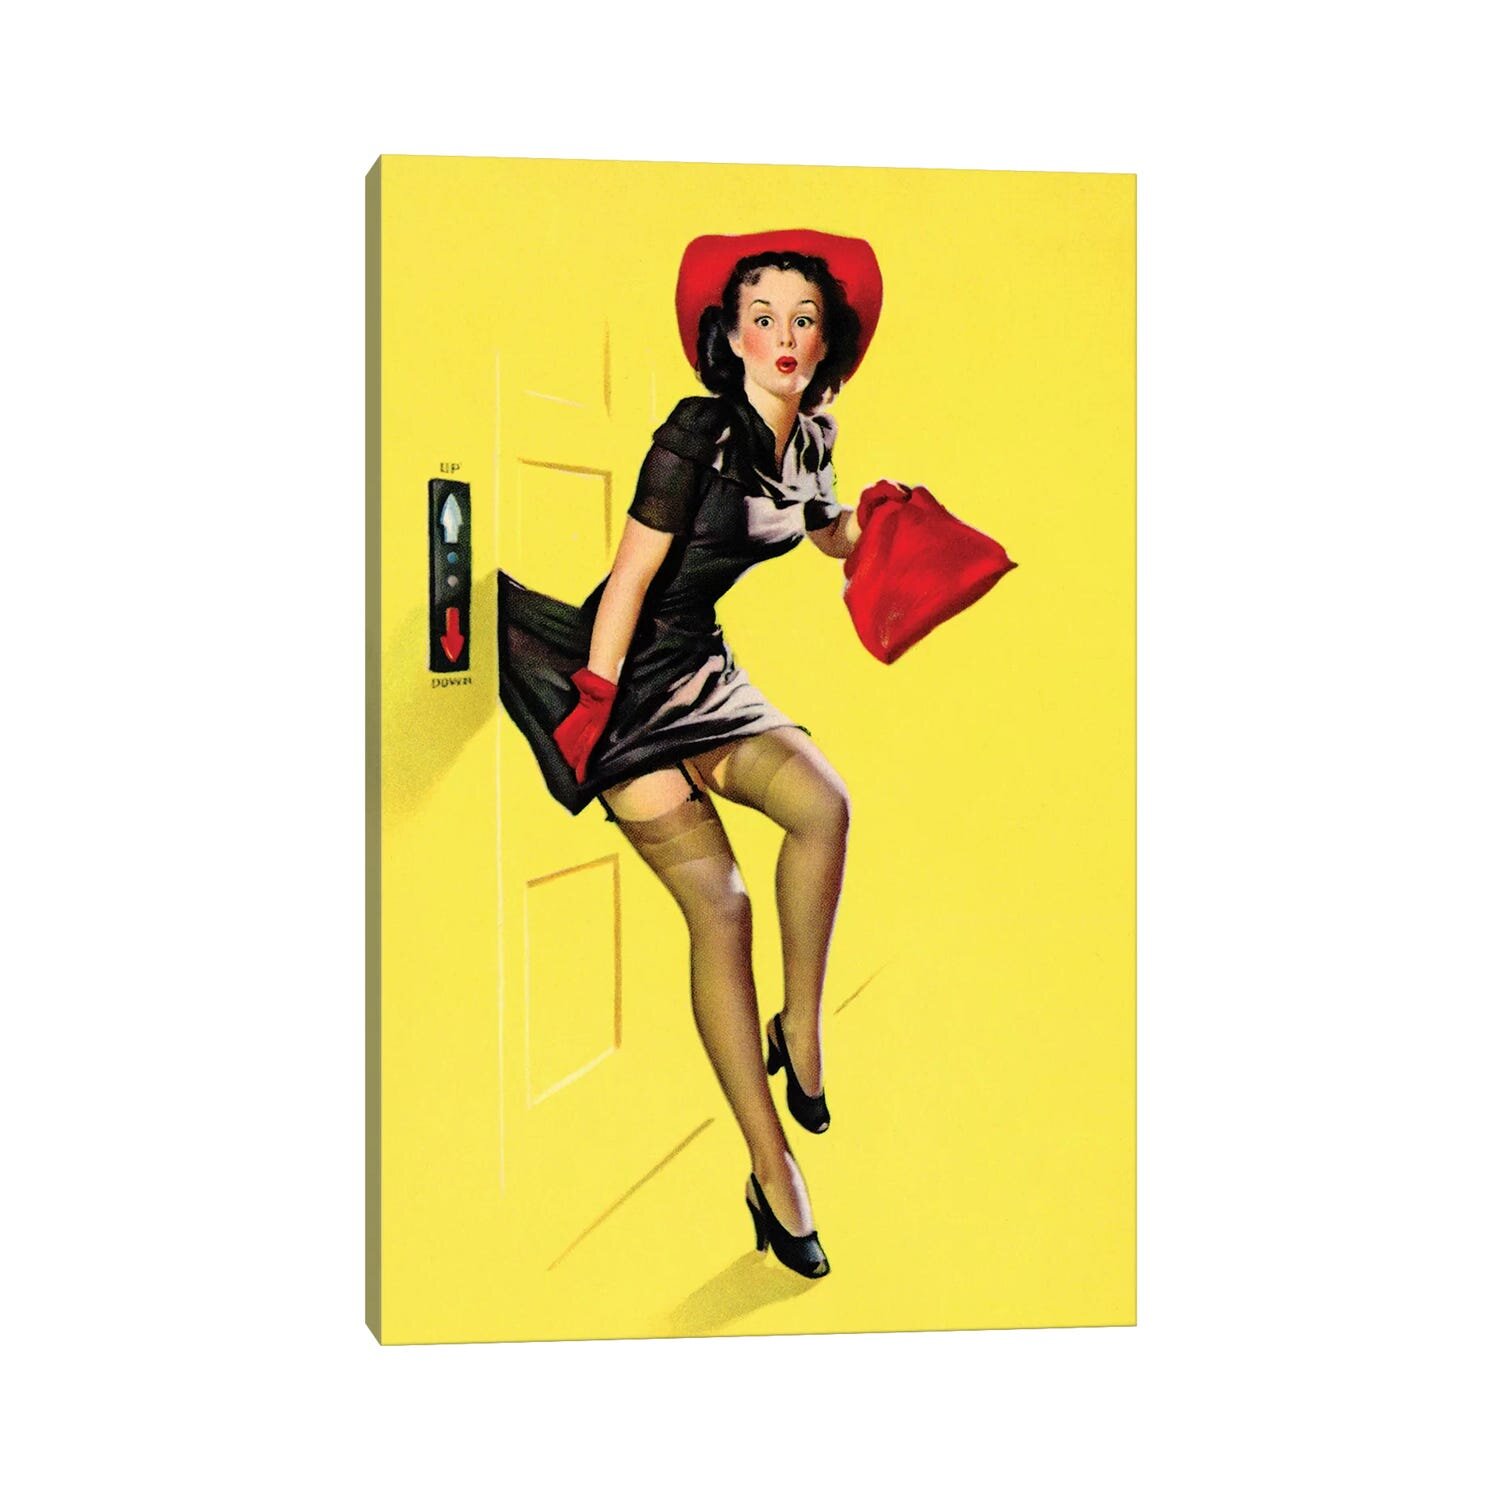 Bless international Going Up Retro Pin-up Girl With Dress Caught